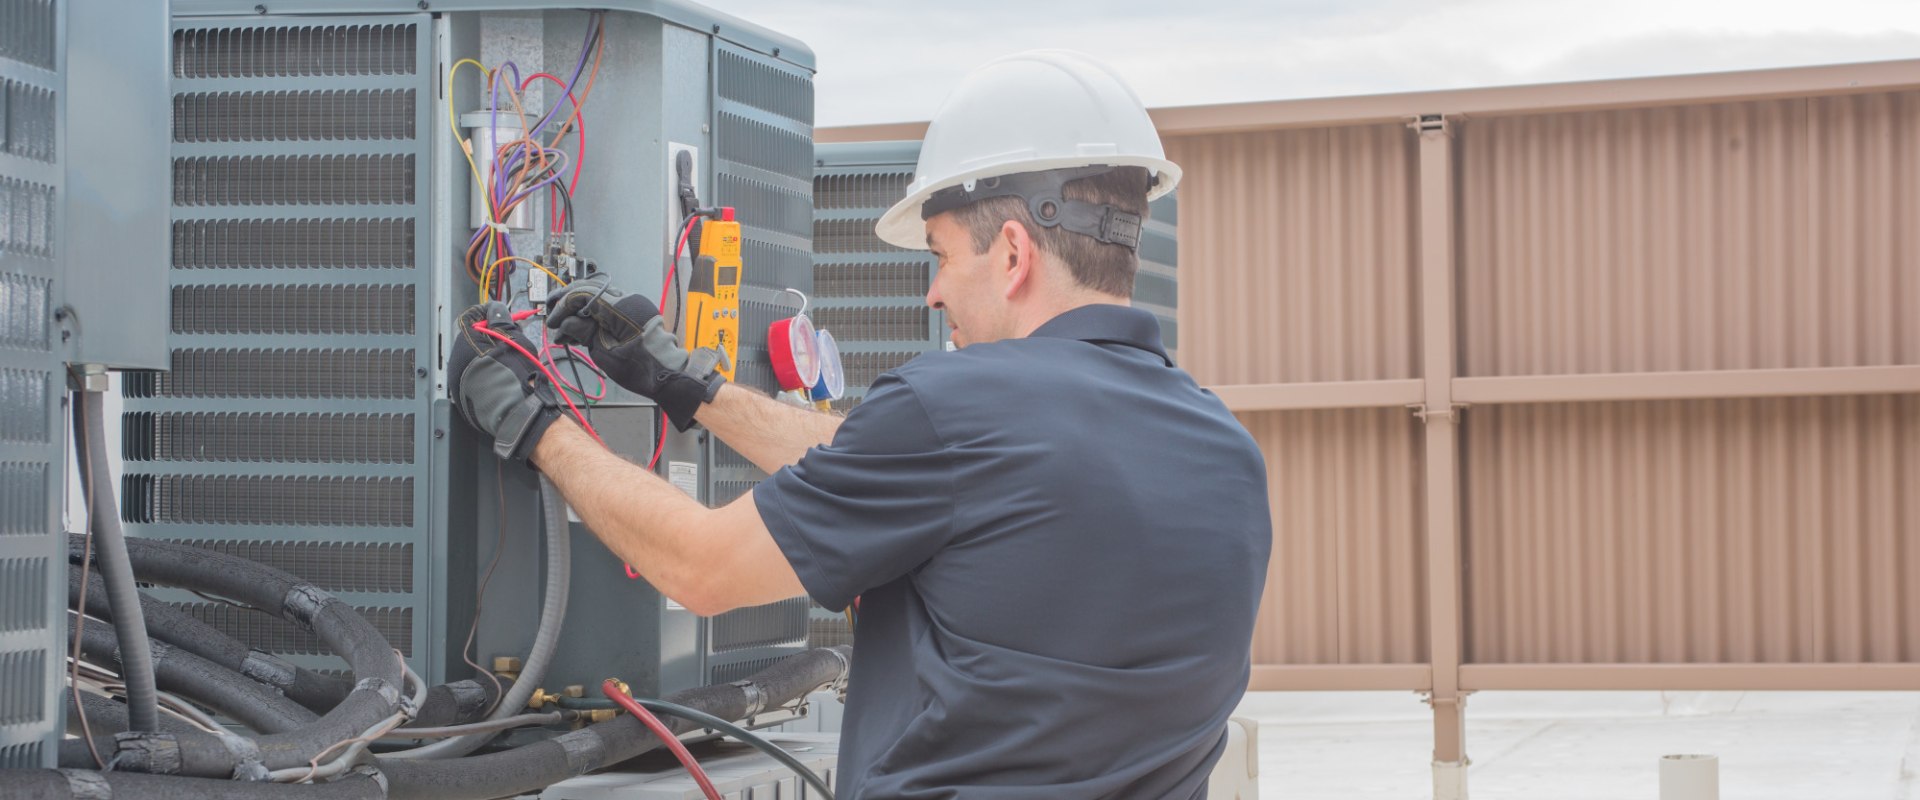 Do You Need to Service Your HVAC System Every Year? - A Guide for Homeowners